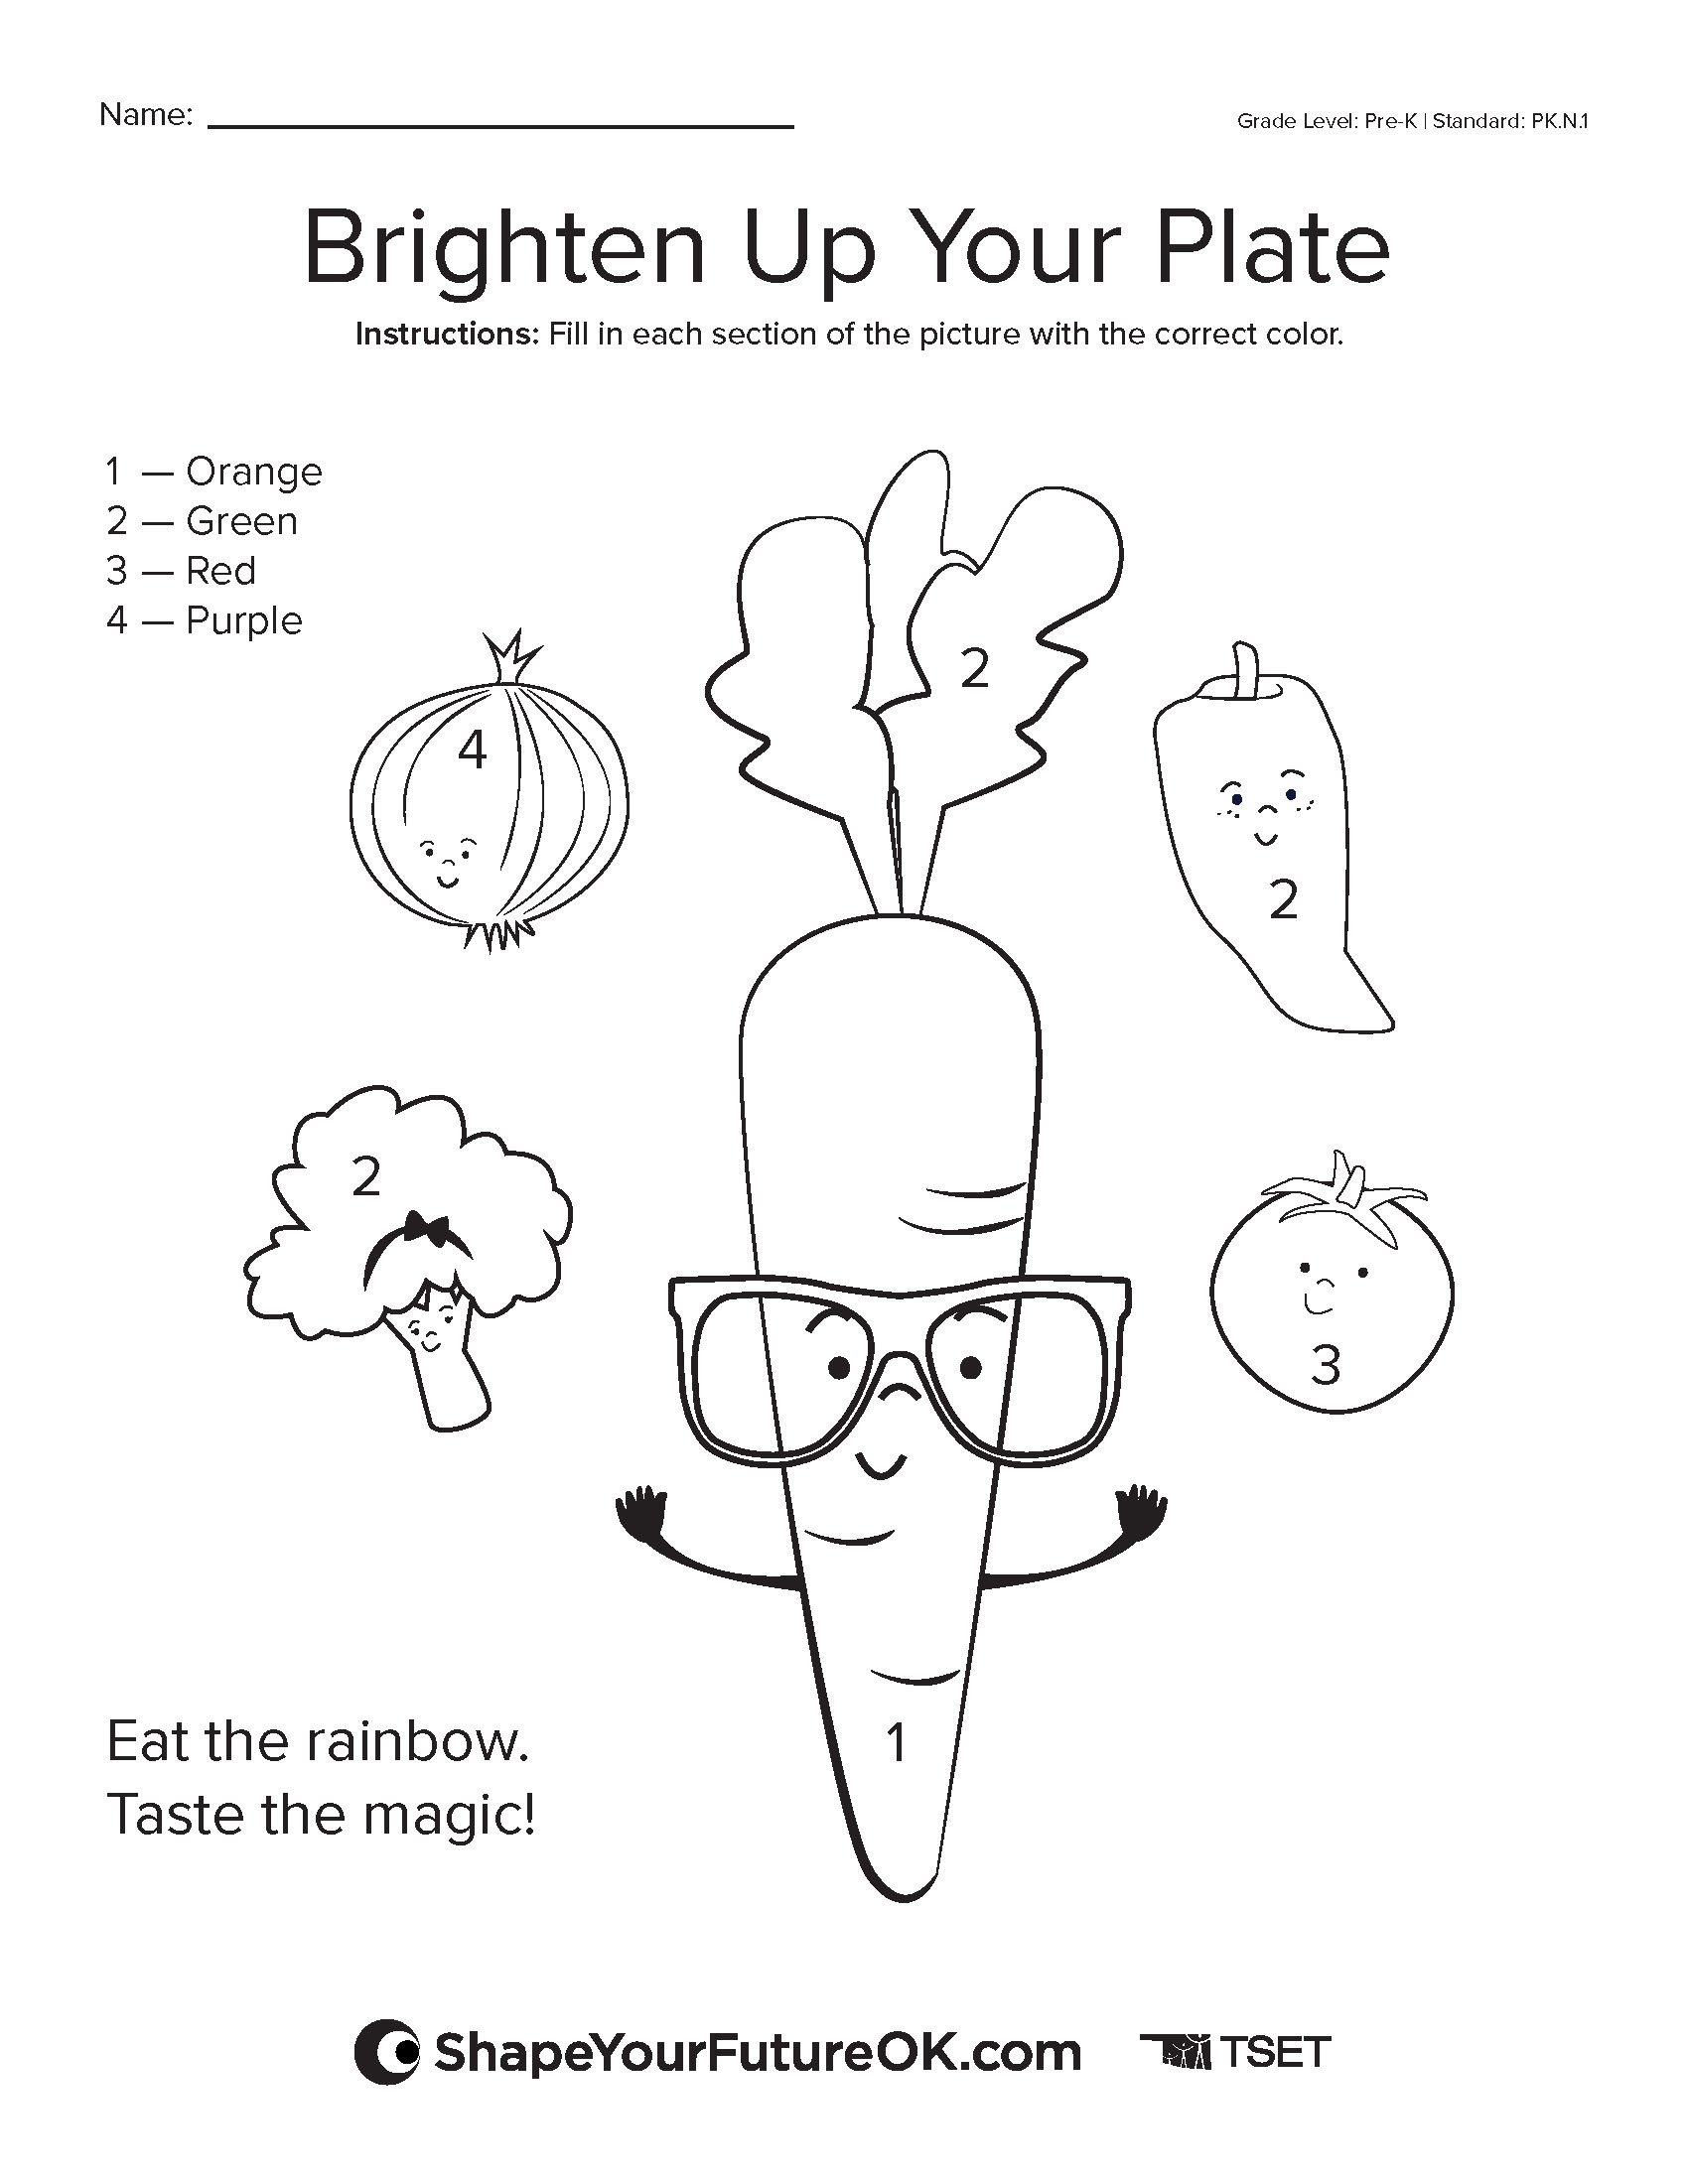 brighten up your plate coloring worksheet